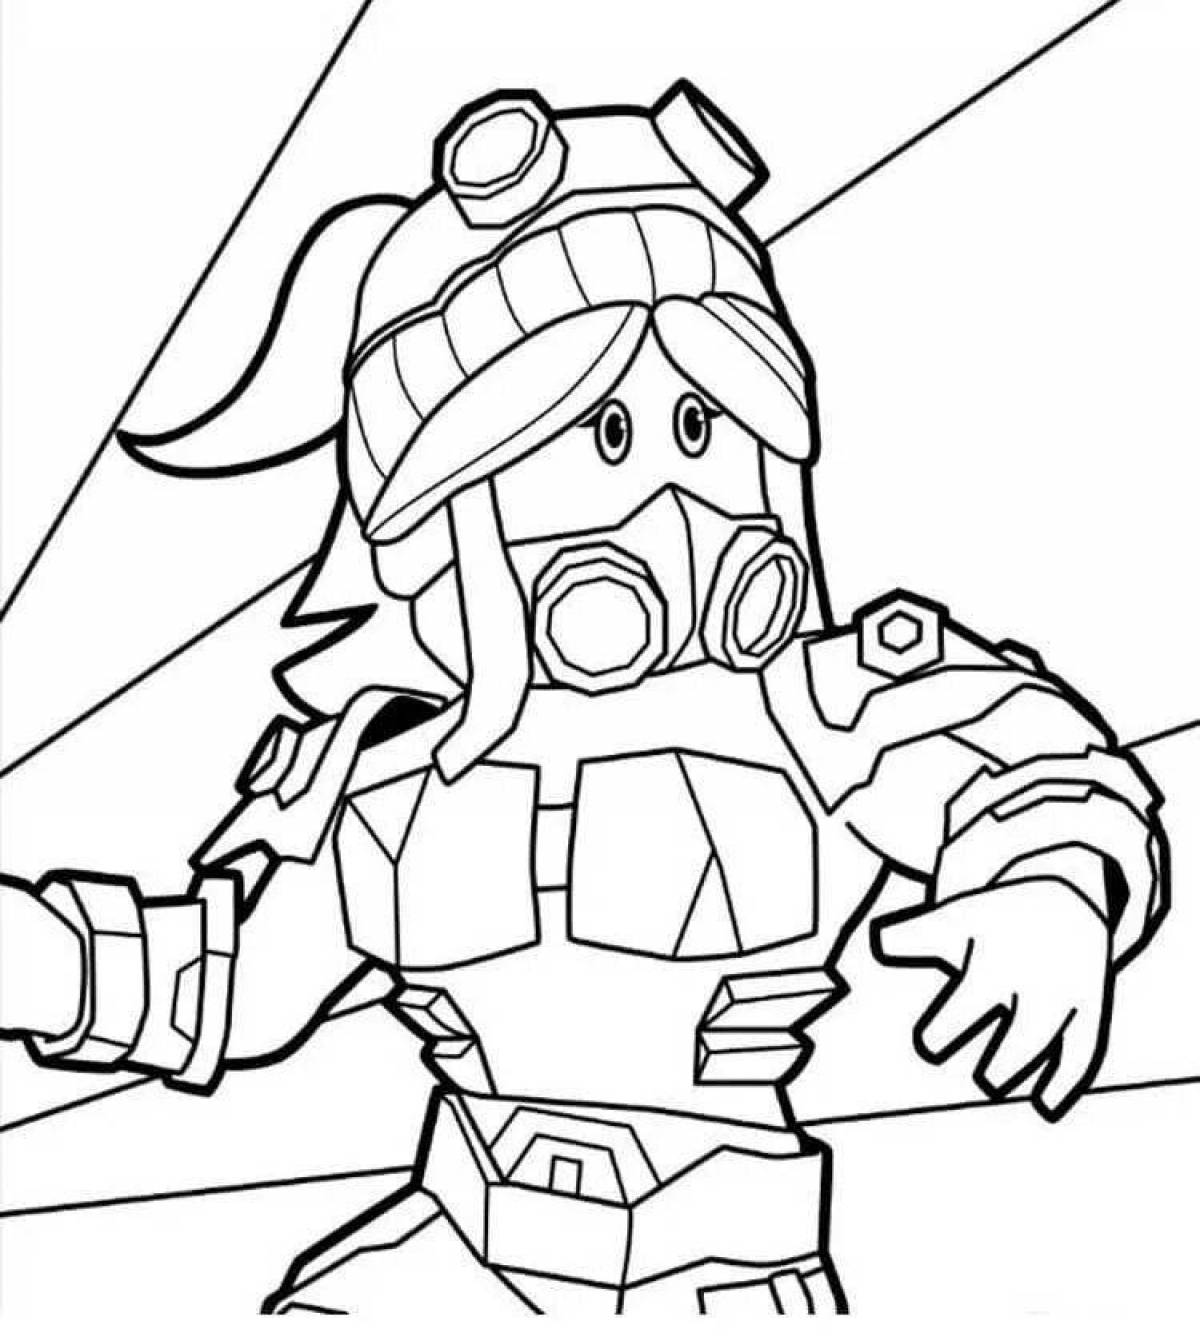 Magic robloh coloring page